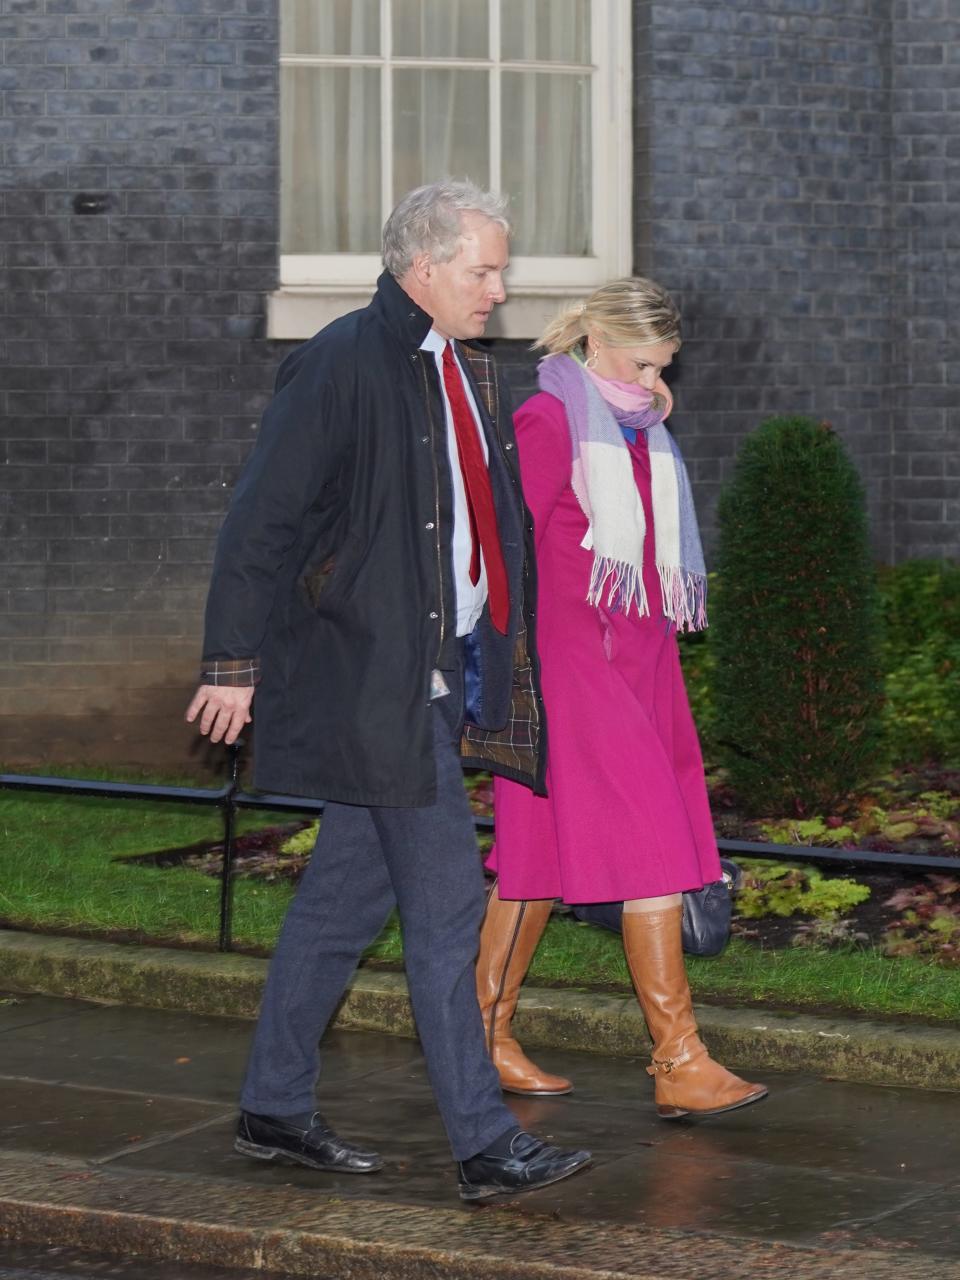 Conservative MP Danny Kruger (left) with Conservative MP Miriam Cates, leaving Downing Street, London, following a breakfast meeting with Prime Minister Rishi Sunak on Tuesday (PA)